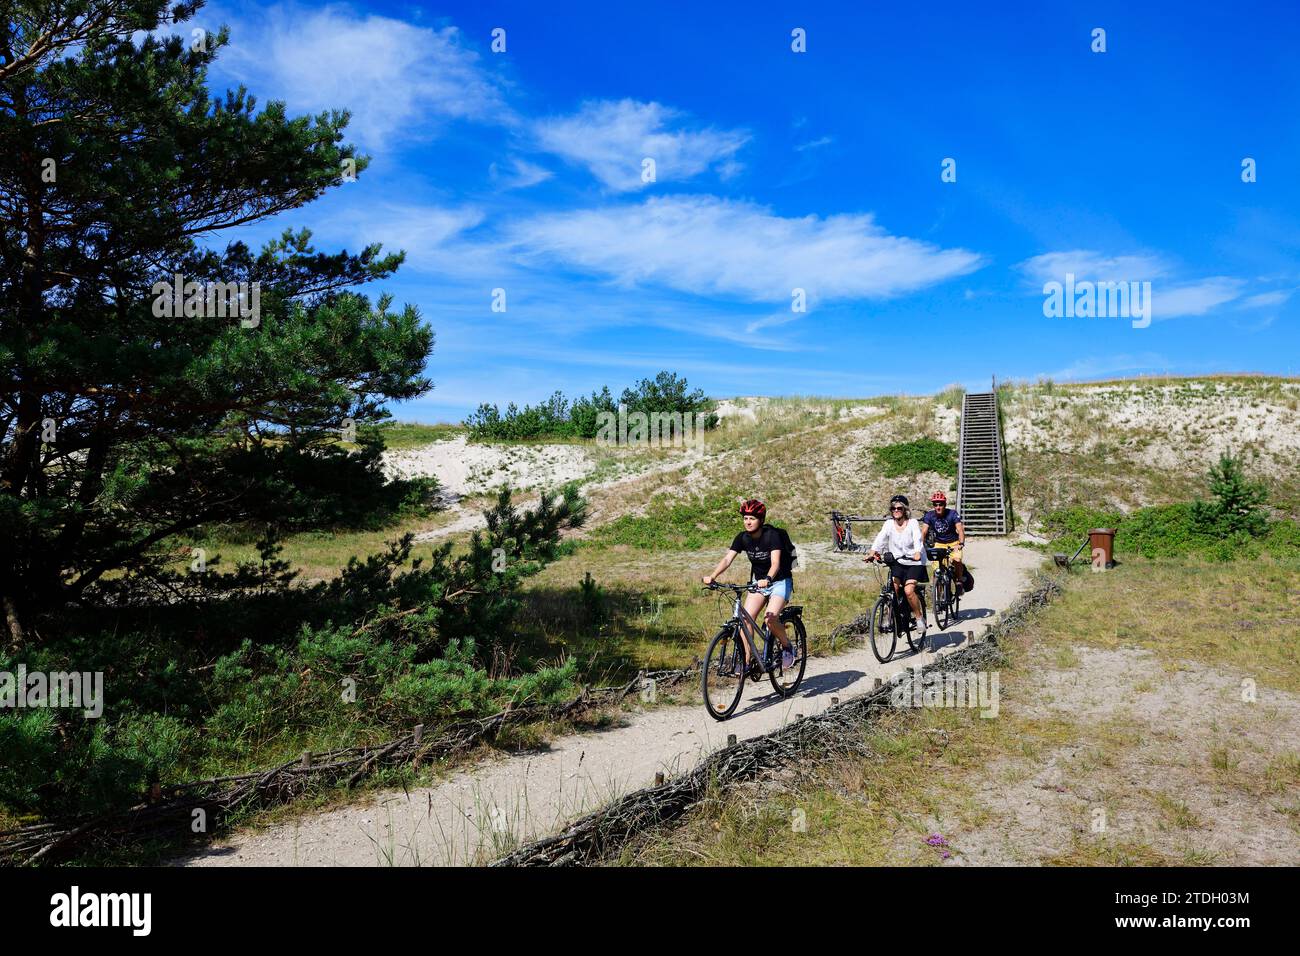 Cyclist on cycle path no. 10 of the Curonian Spit, Juodkrante, Lithuania Stock Photo